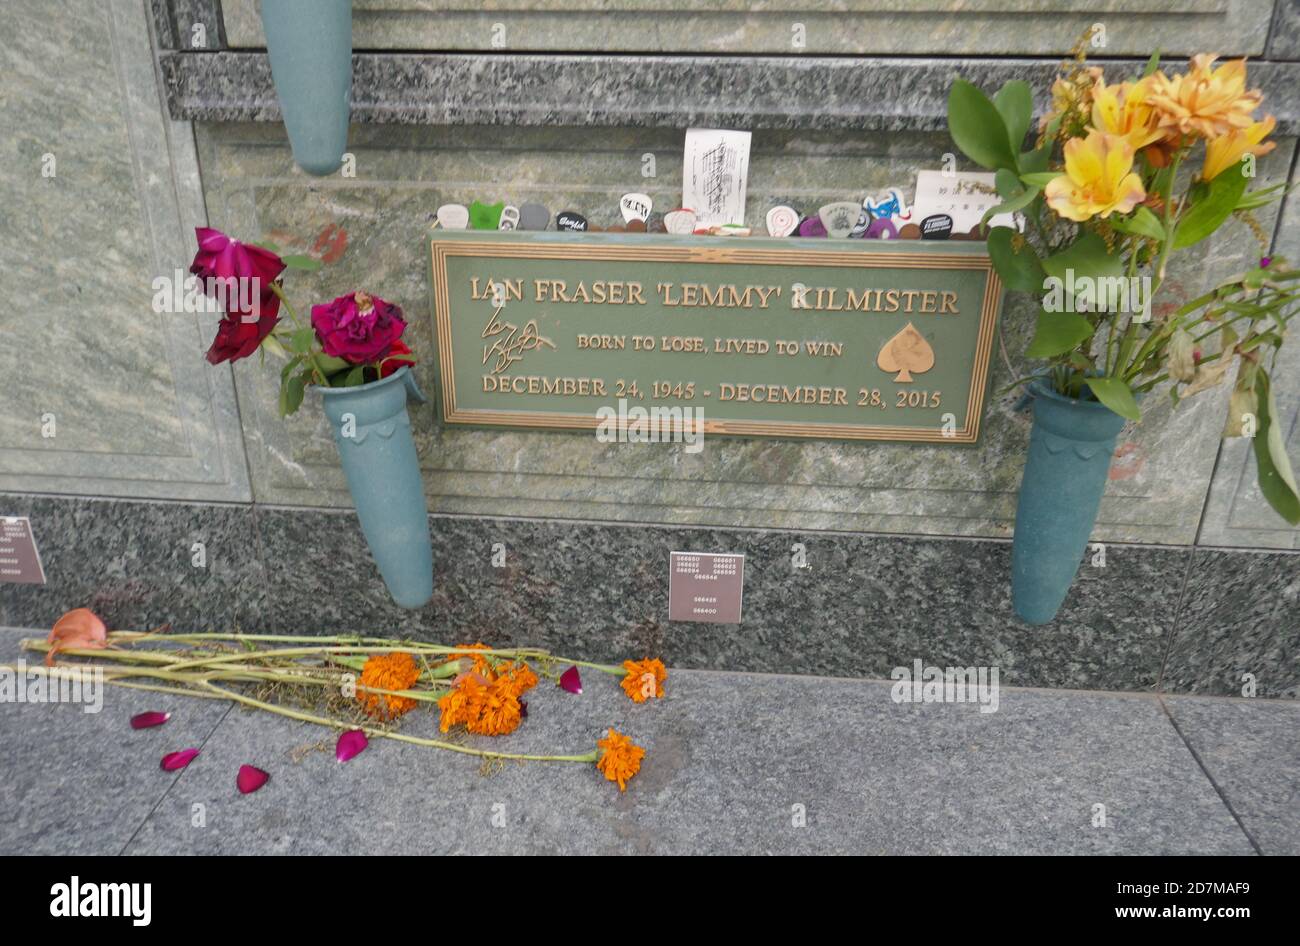 Los Angeles, California, USA 22nd October 2020 A general view of atmosphere of Ian Fraser 'Lemmy' Kilmister's Grave on October 22, 2020 at Forest Lawn Memorial Park in Los Angeles, California, USA. Photo by Barry King/Alamy Stock Photo Stock Photo